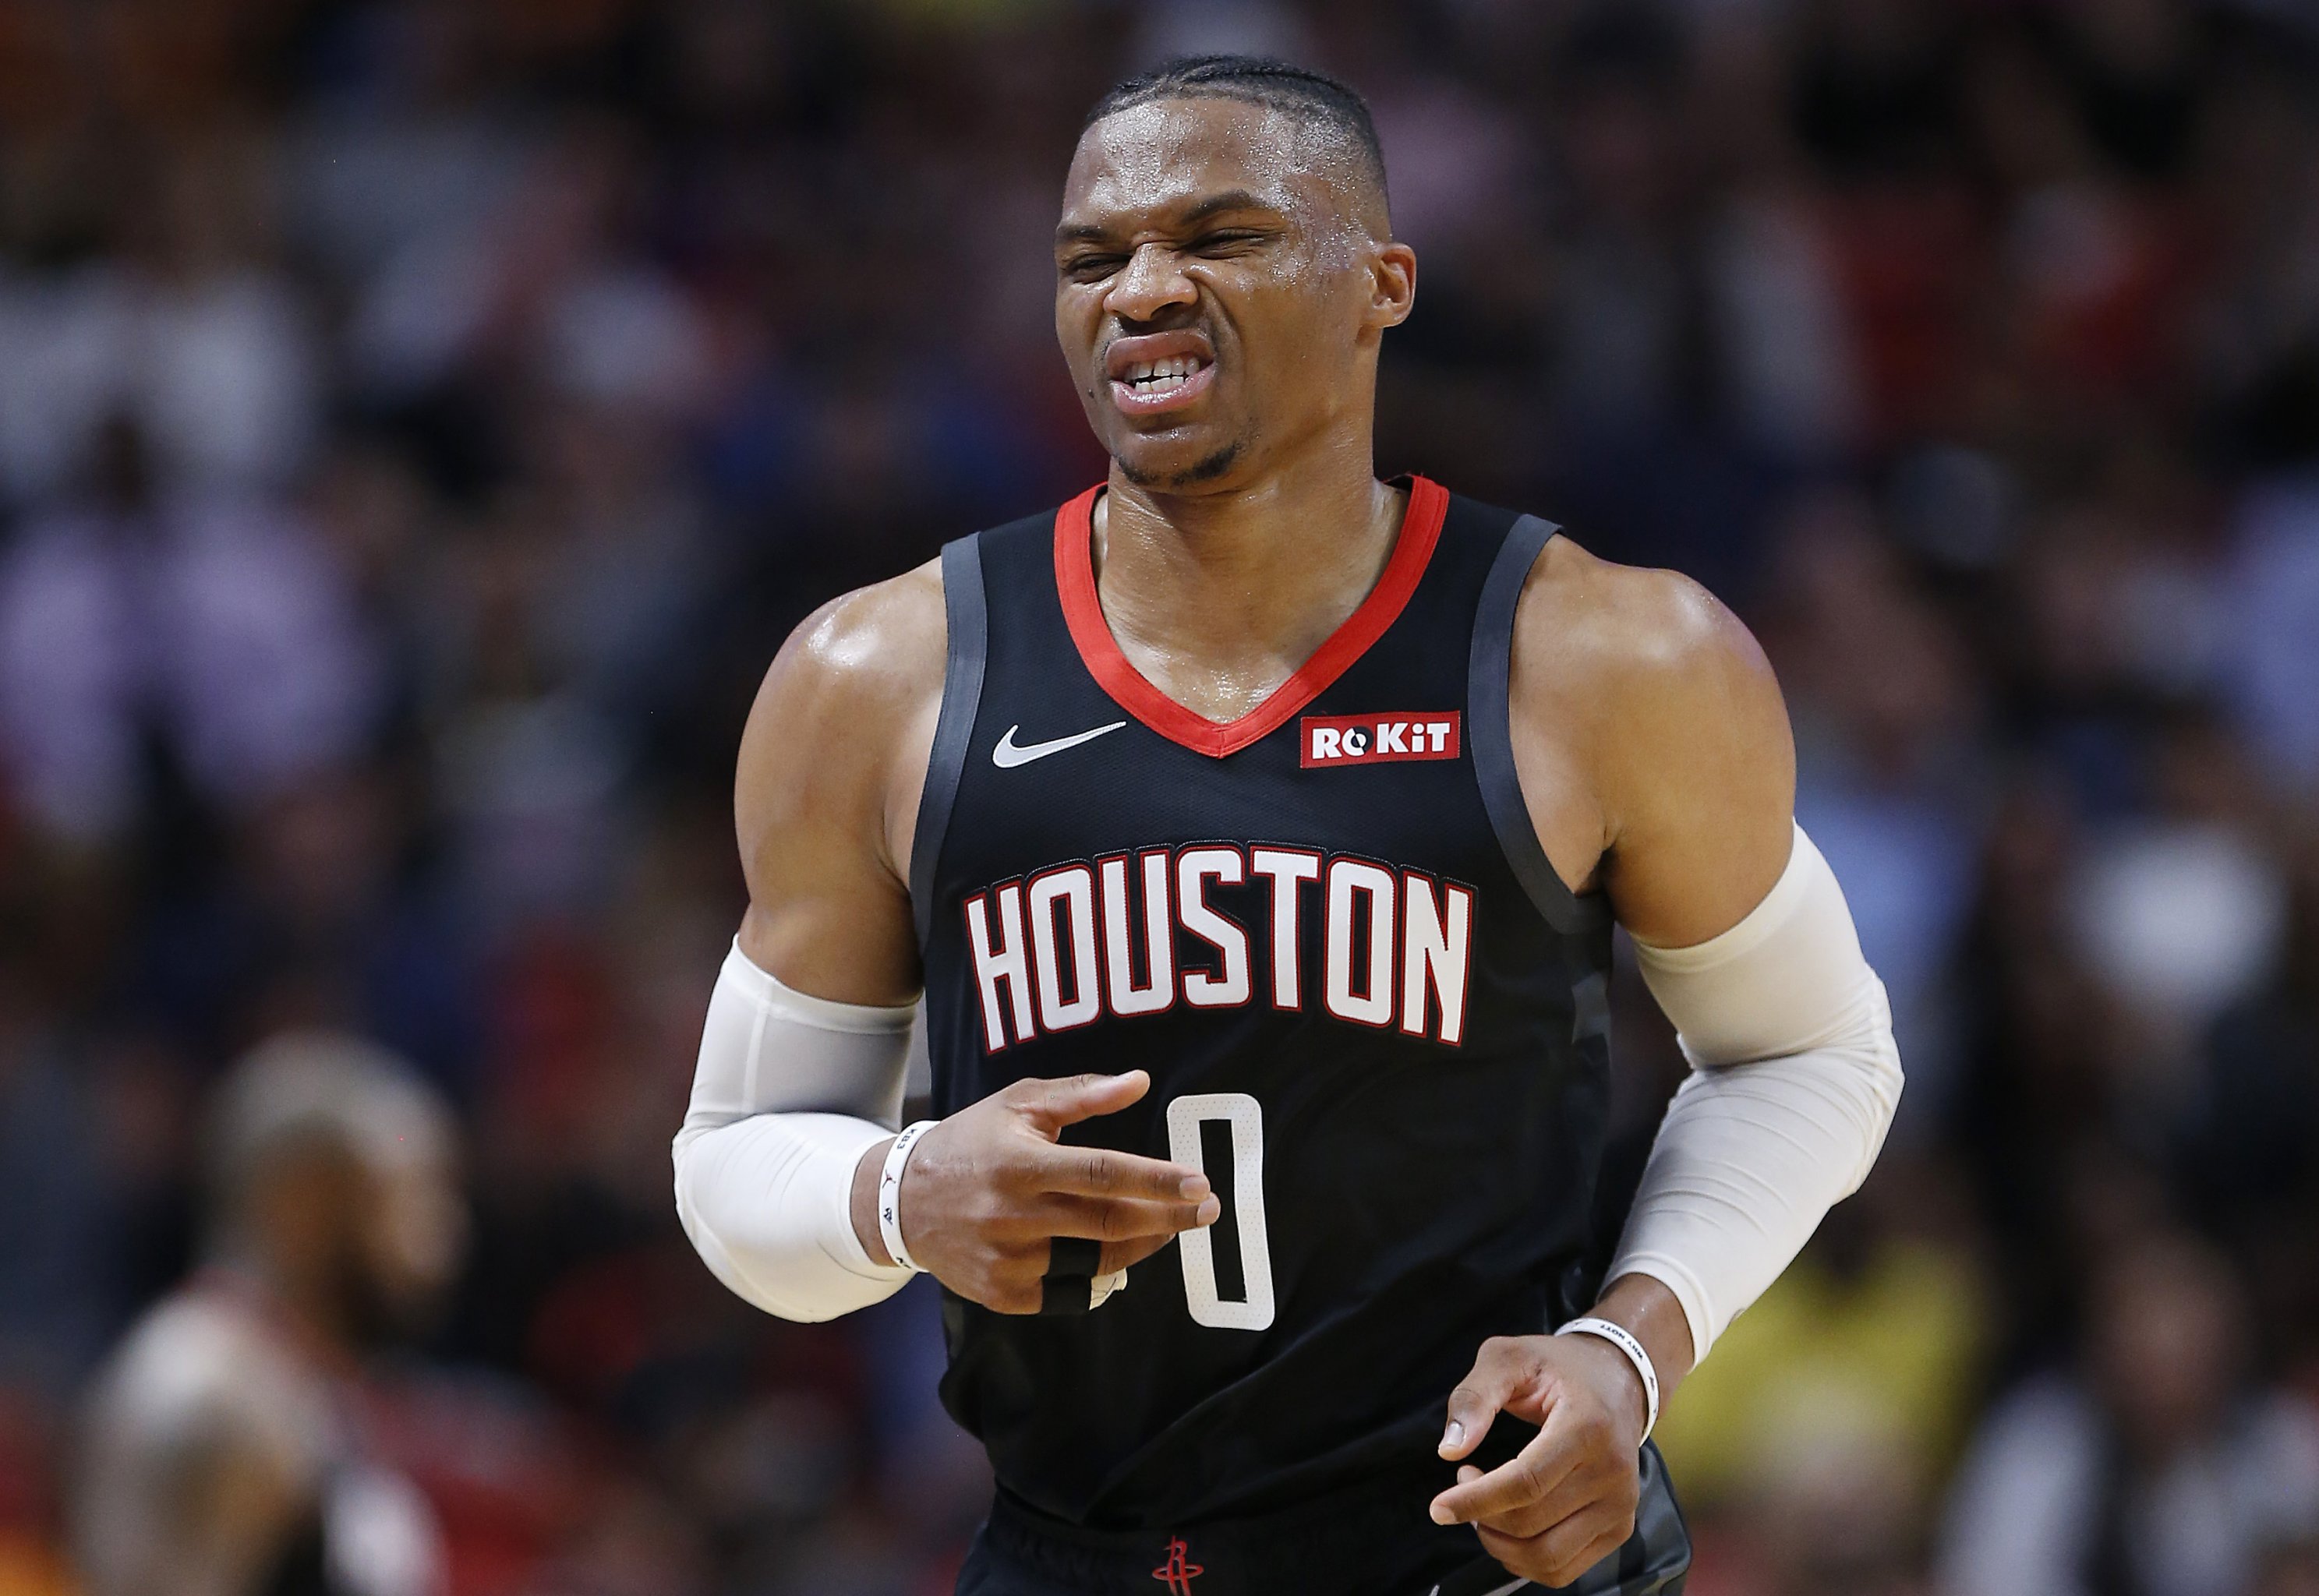 Houston Rockets: P.J. Tucker disappointed FIBA World Cup hopes dashed